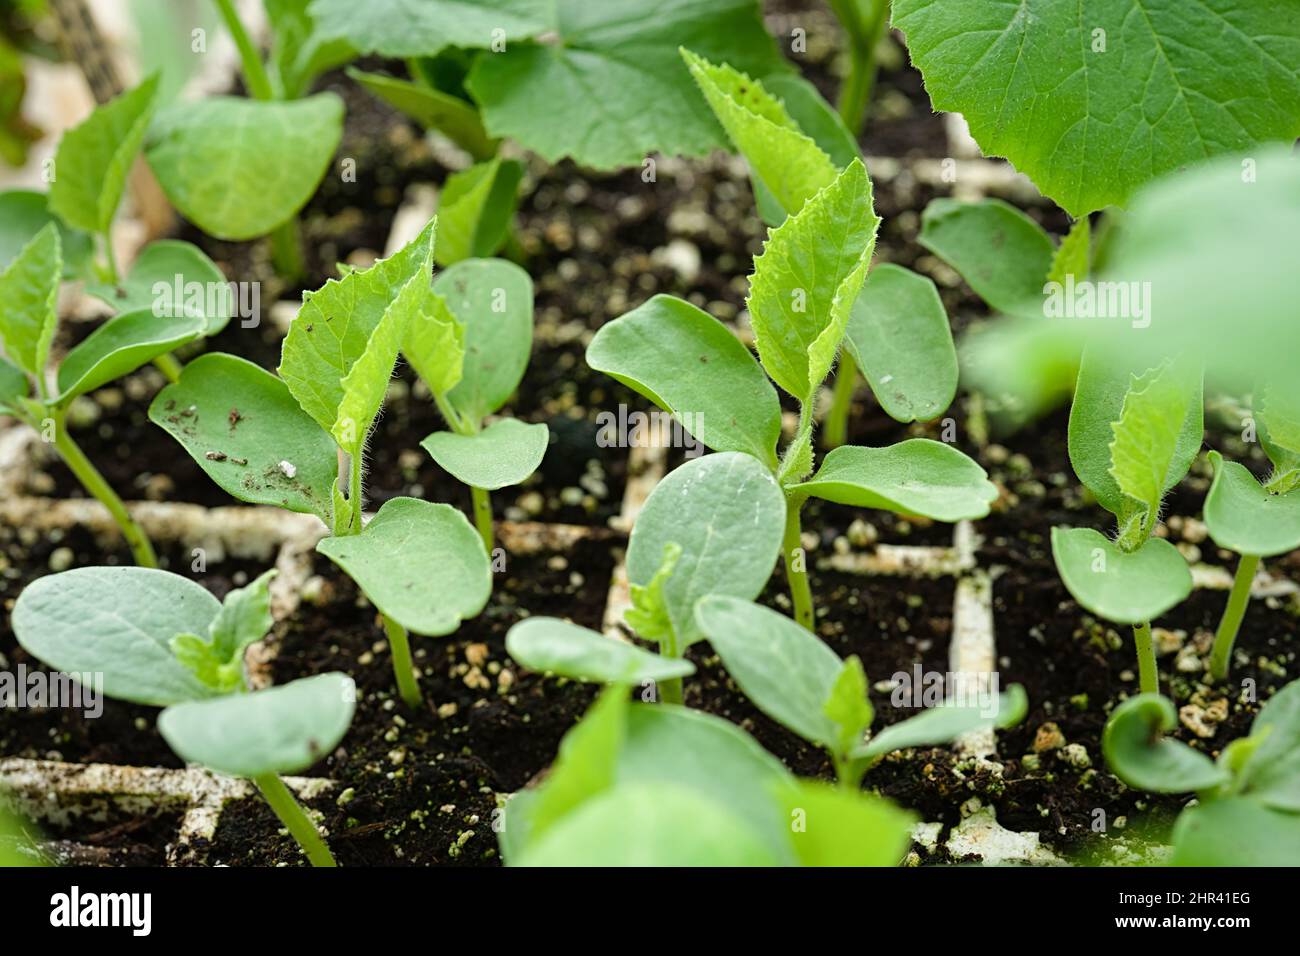 Young cucumber seedlings growing in a greenhouse environment. Stock Photo